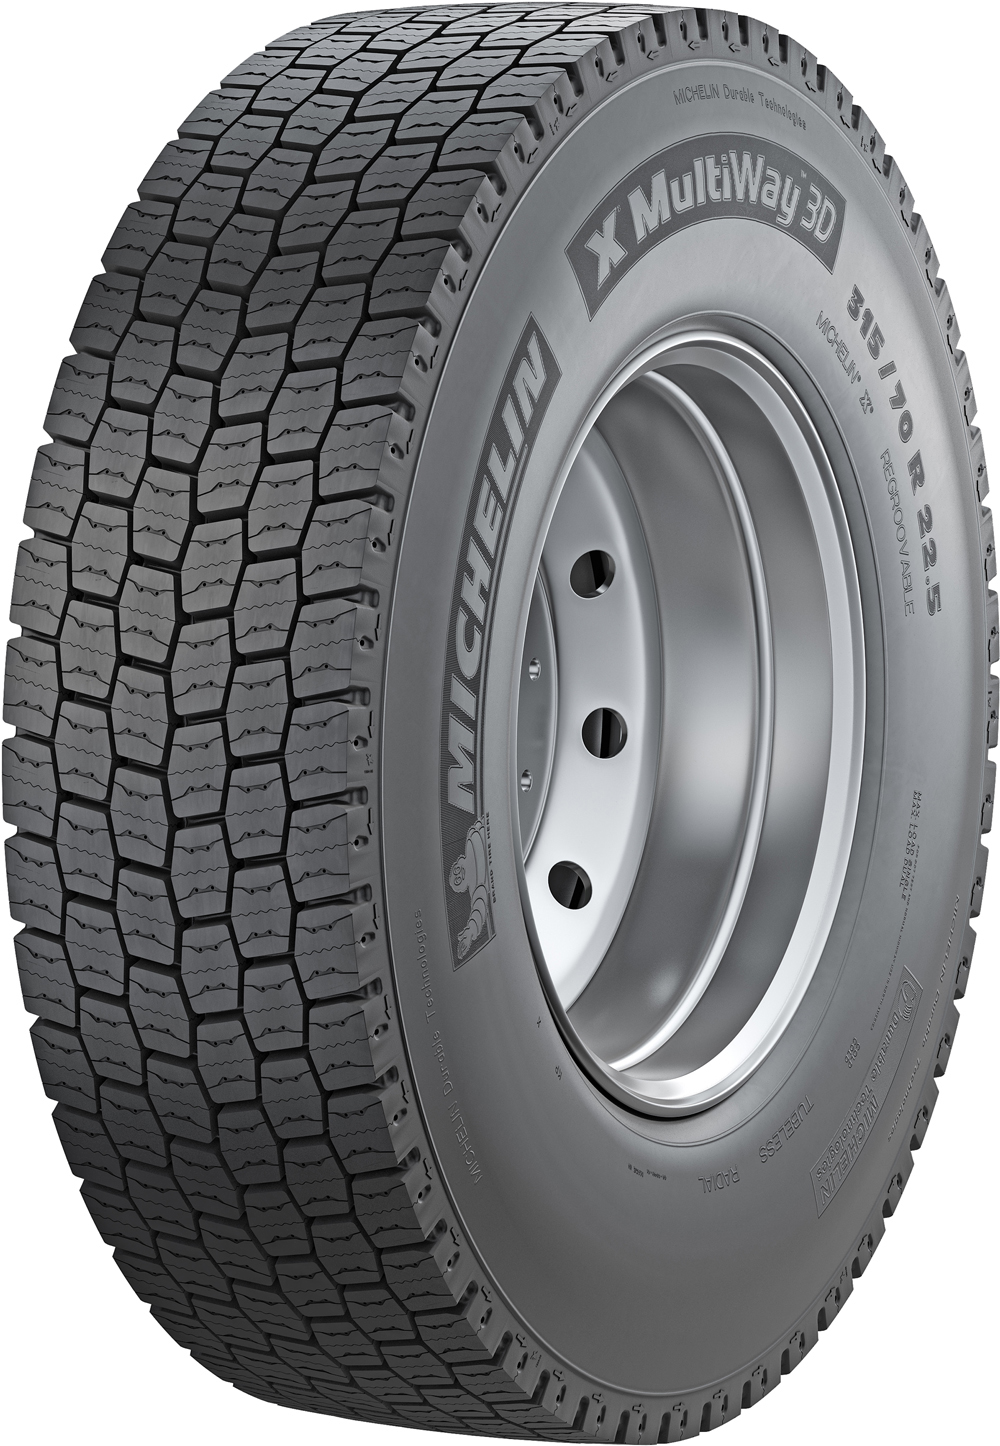 product_type-heavy_tires MICHELIN X MULTIWAY 3D XDE (2017) 295/80 R22.5 152L